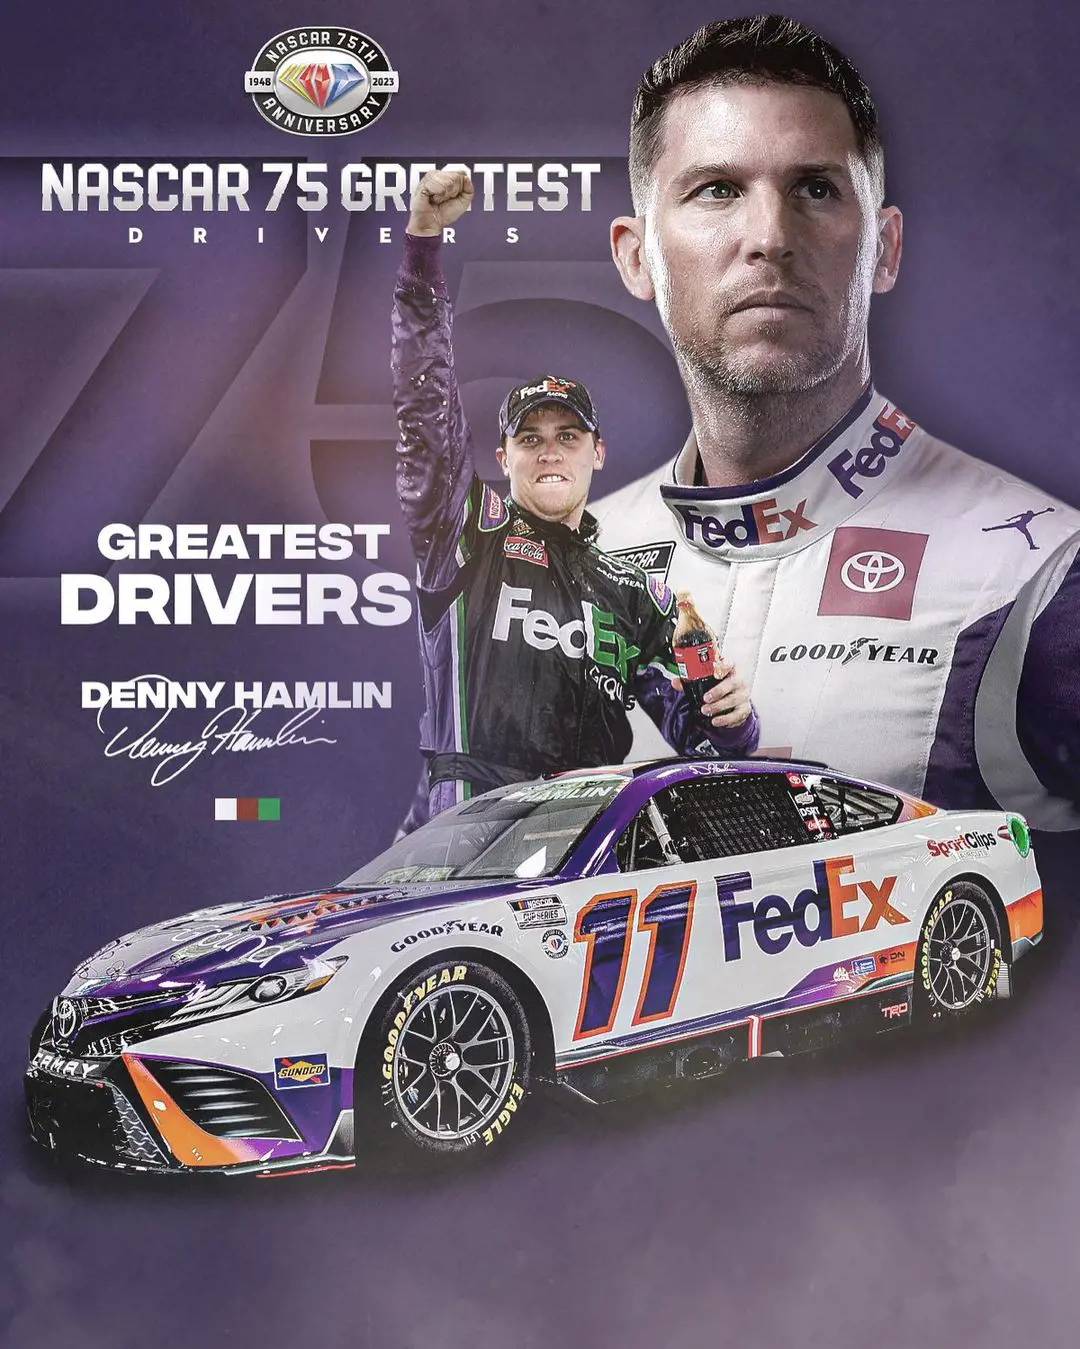 Hamlin honored and awarded for being among the 75 Greatest Drivers in the history of the NASCAR